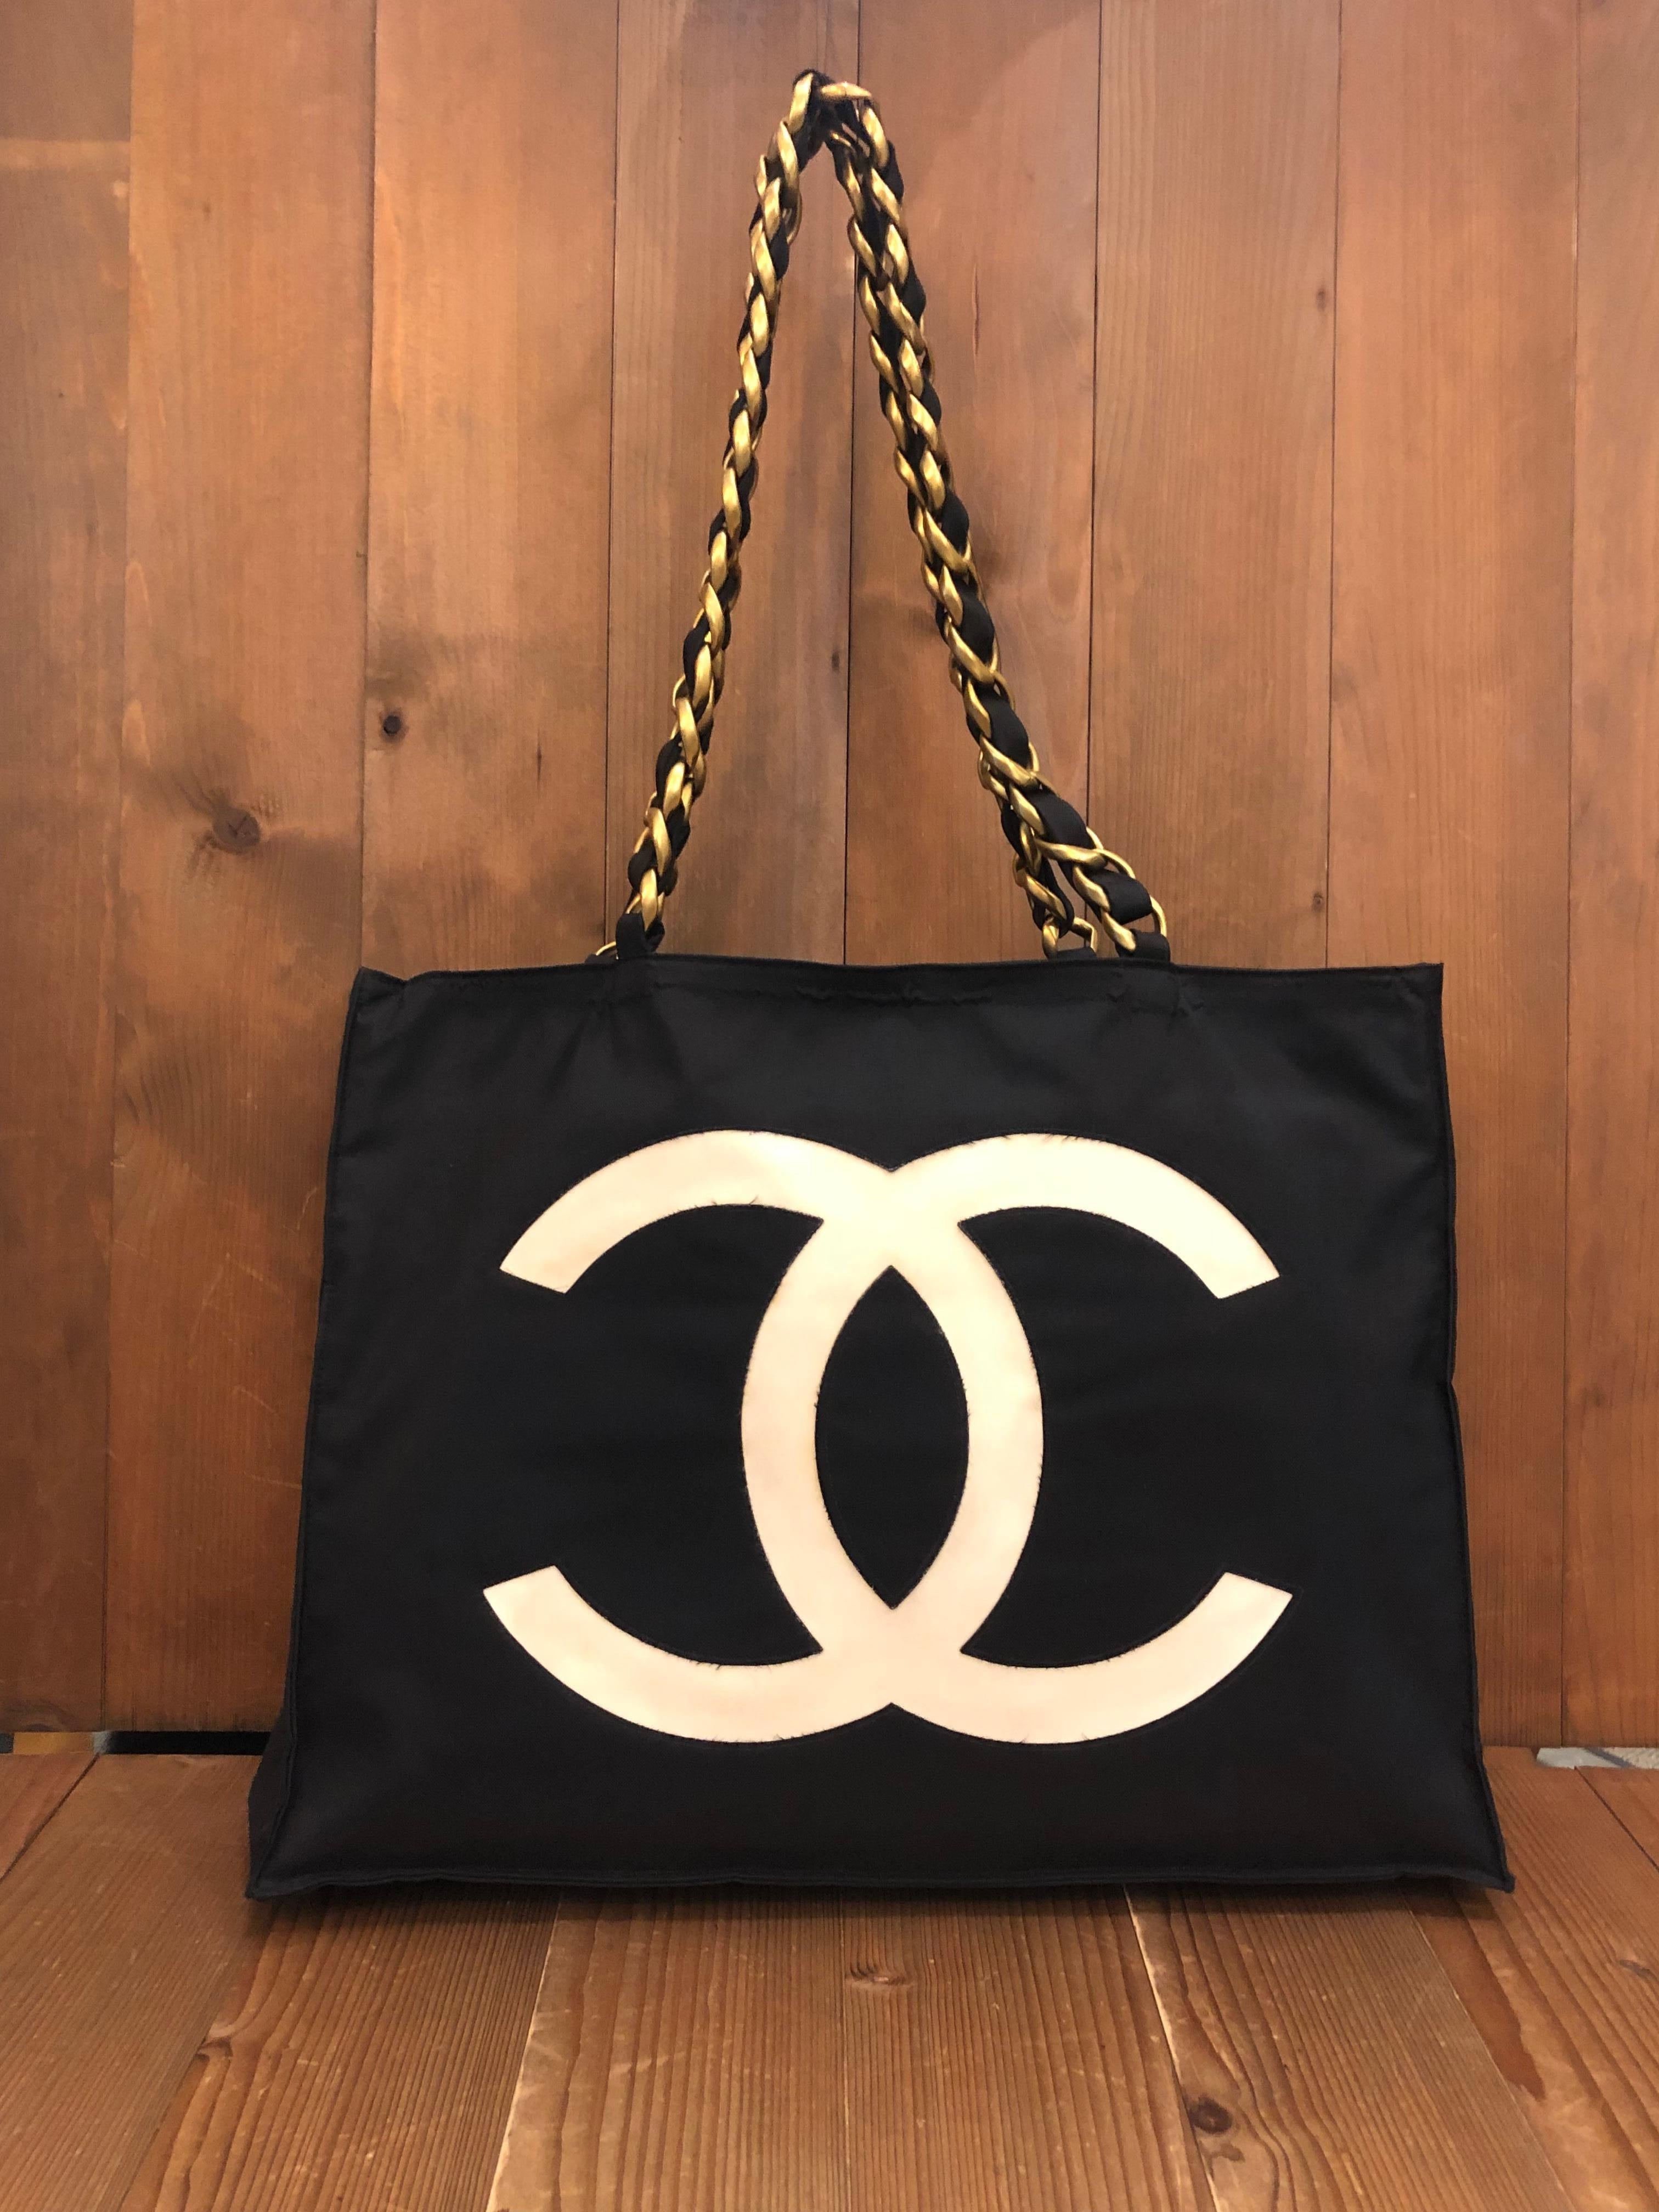 This vintage CHANEL jumbo chain tote is crafted of black nylon featuring a massive cut-out white CC logo on one side and cut-out CHANEL letters on the other. This tote has two sturdy gold toned shoulder chains interlaced with black nylon. The